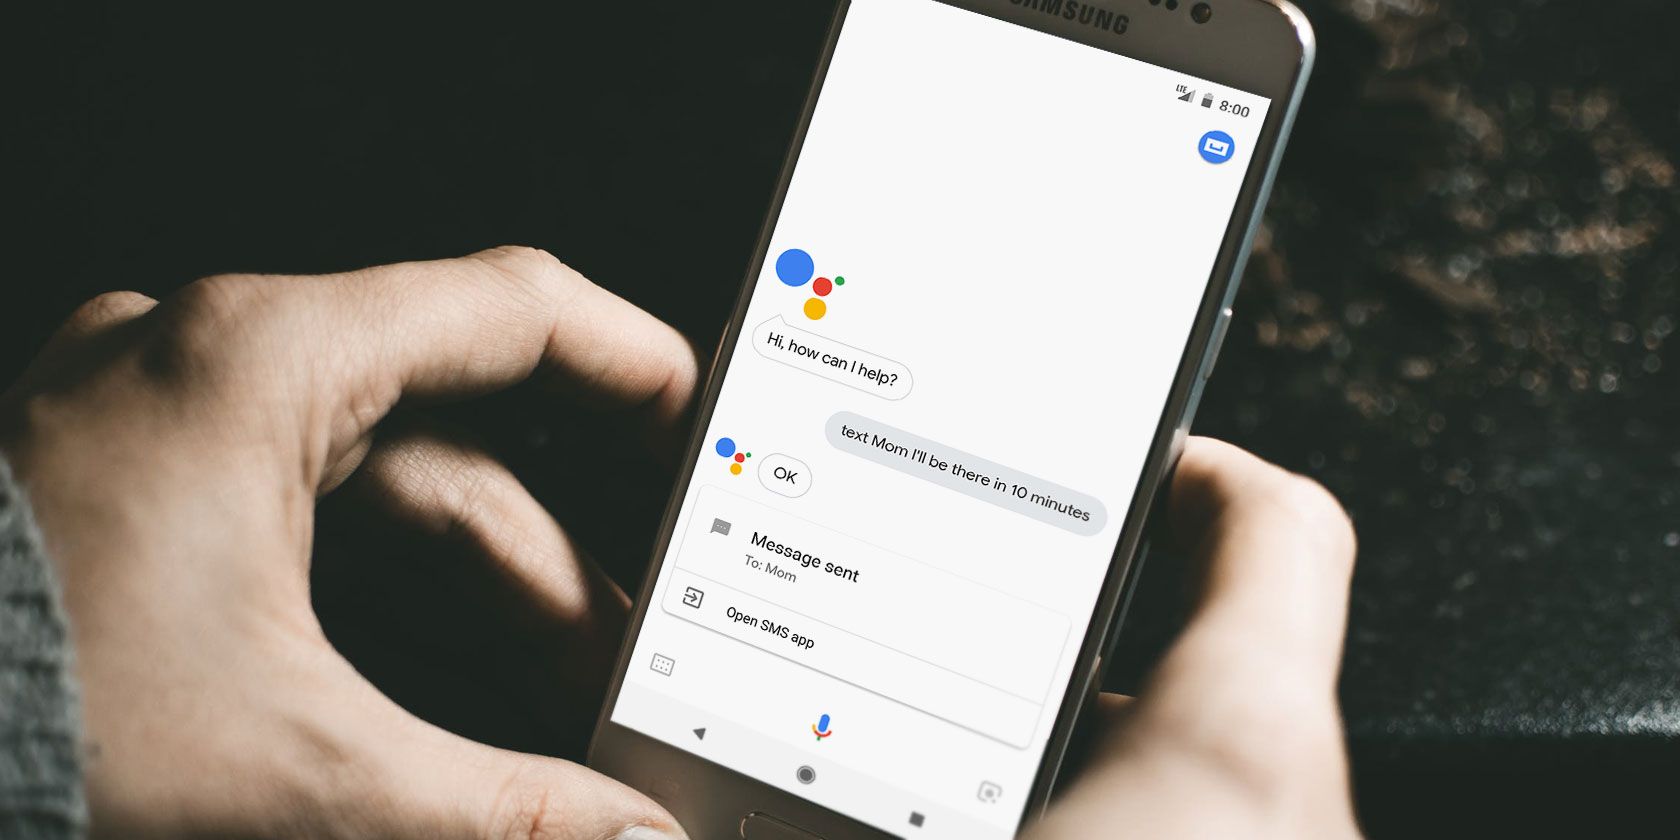 Google Assistant interface on Android phone